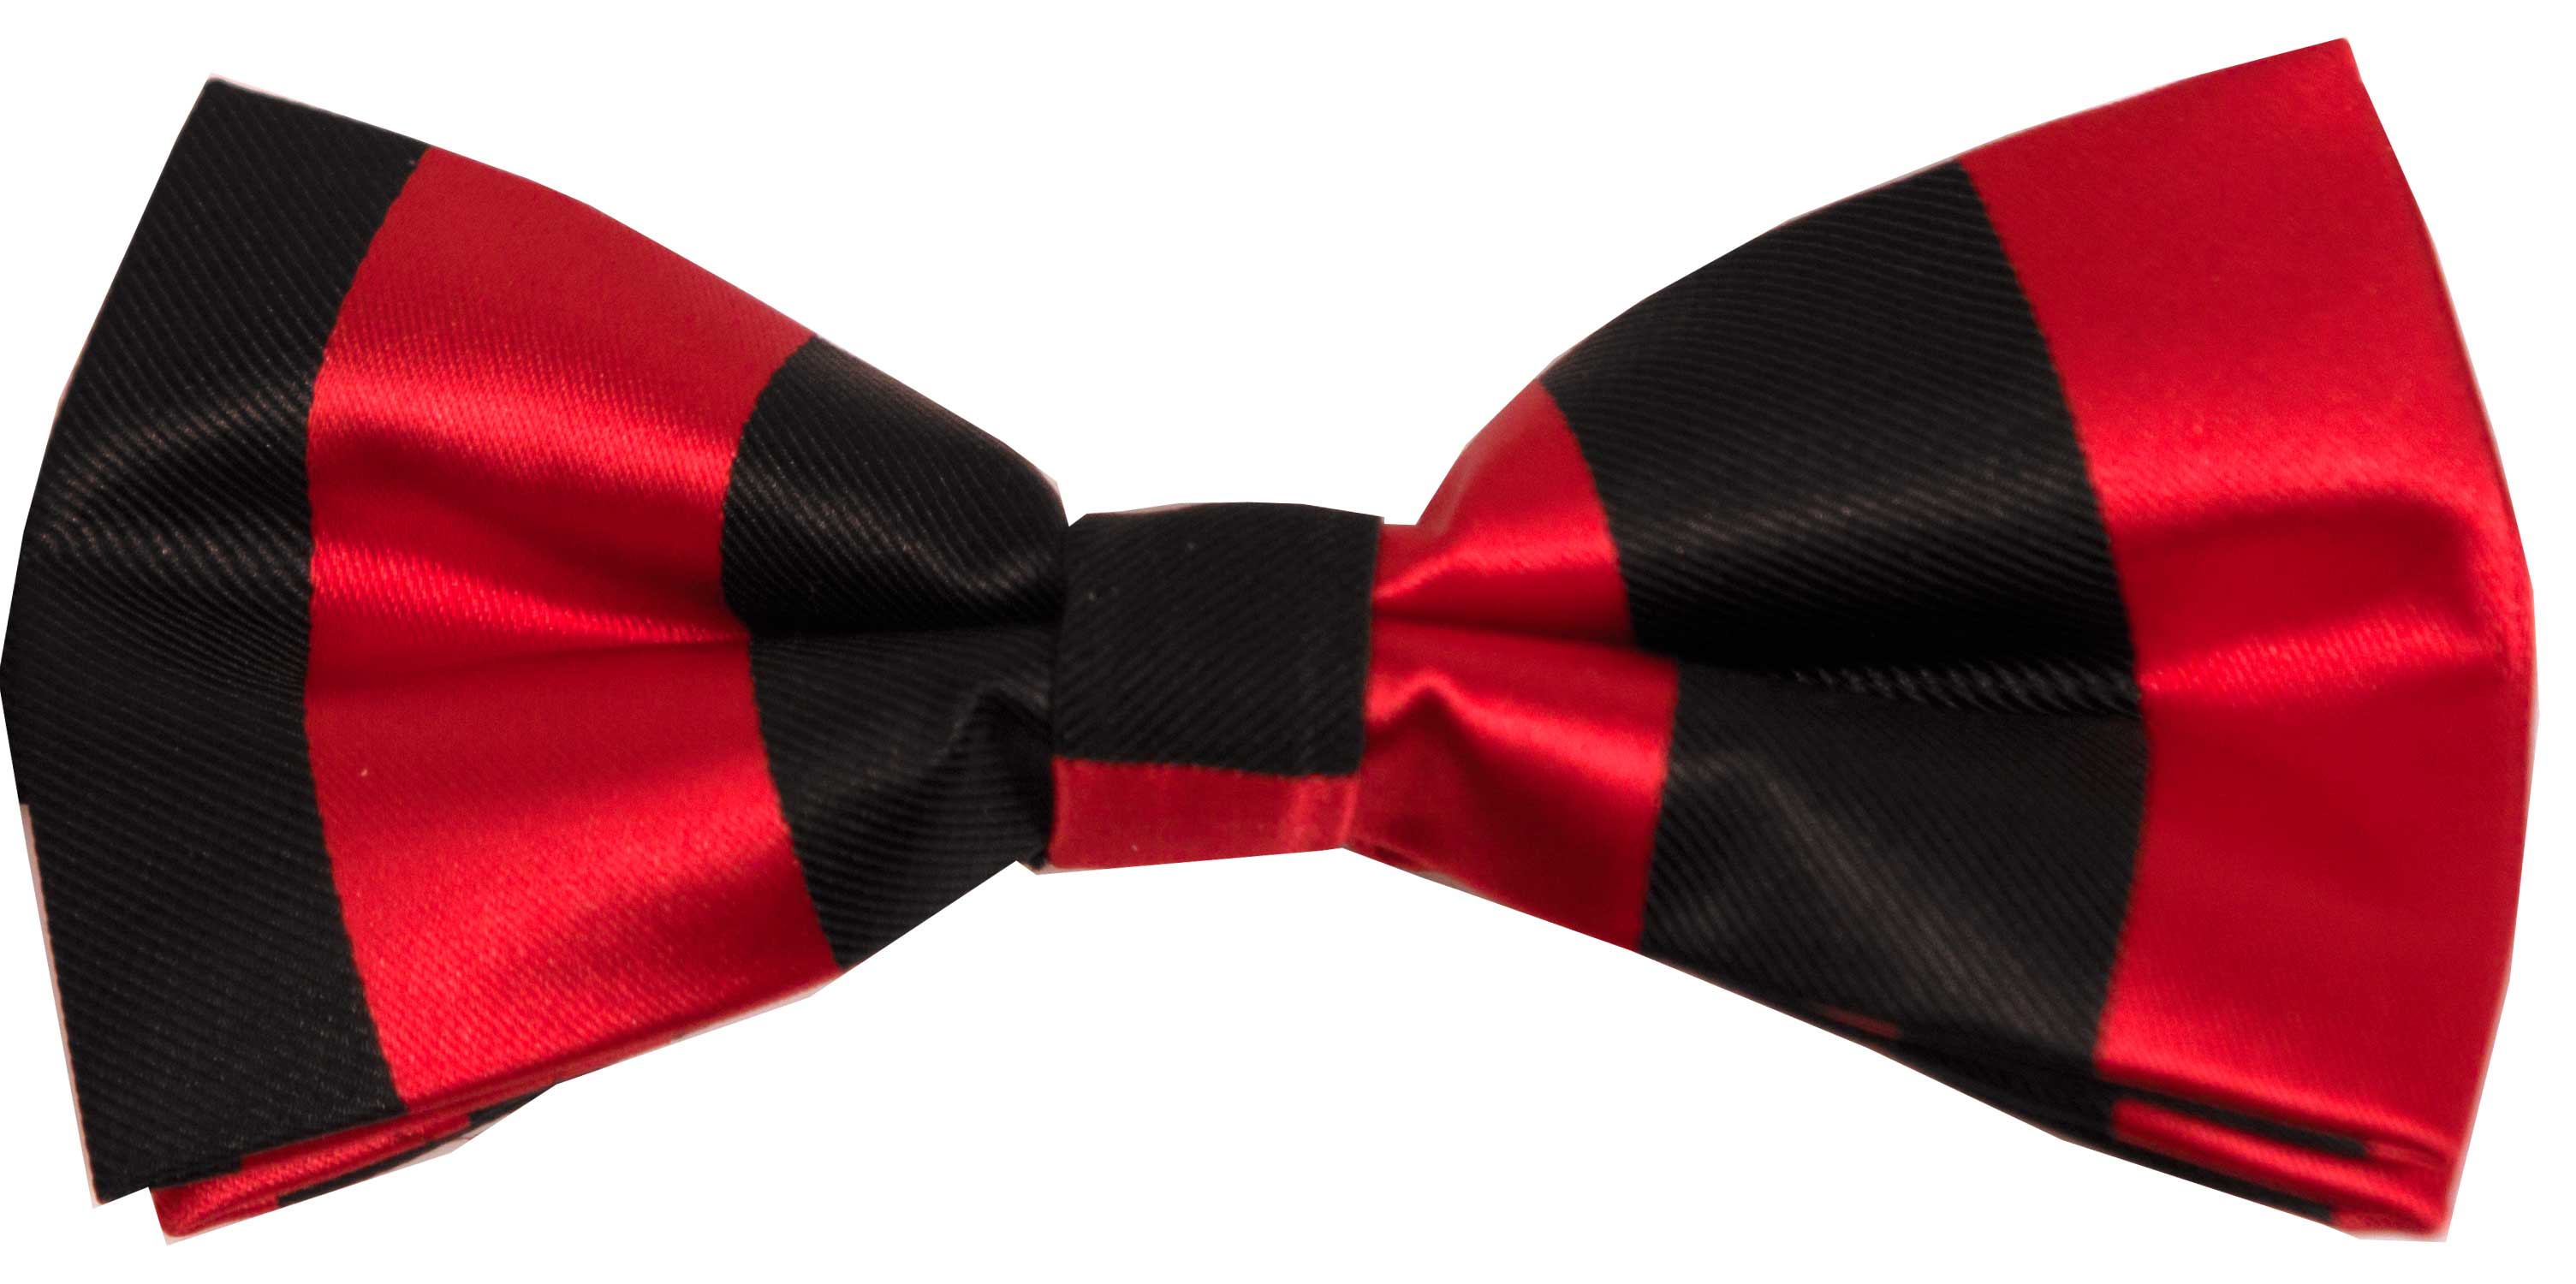 Bow tie (red and black)